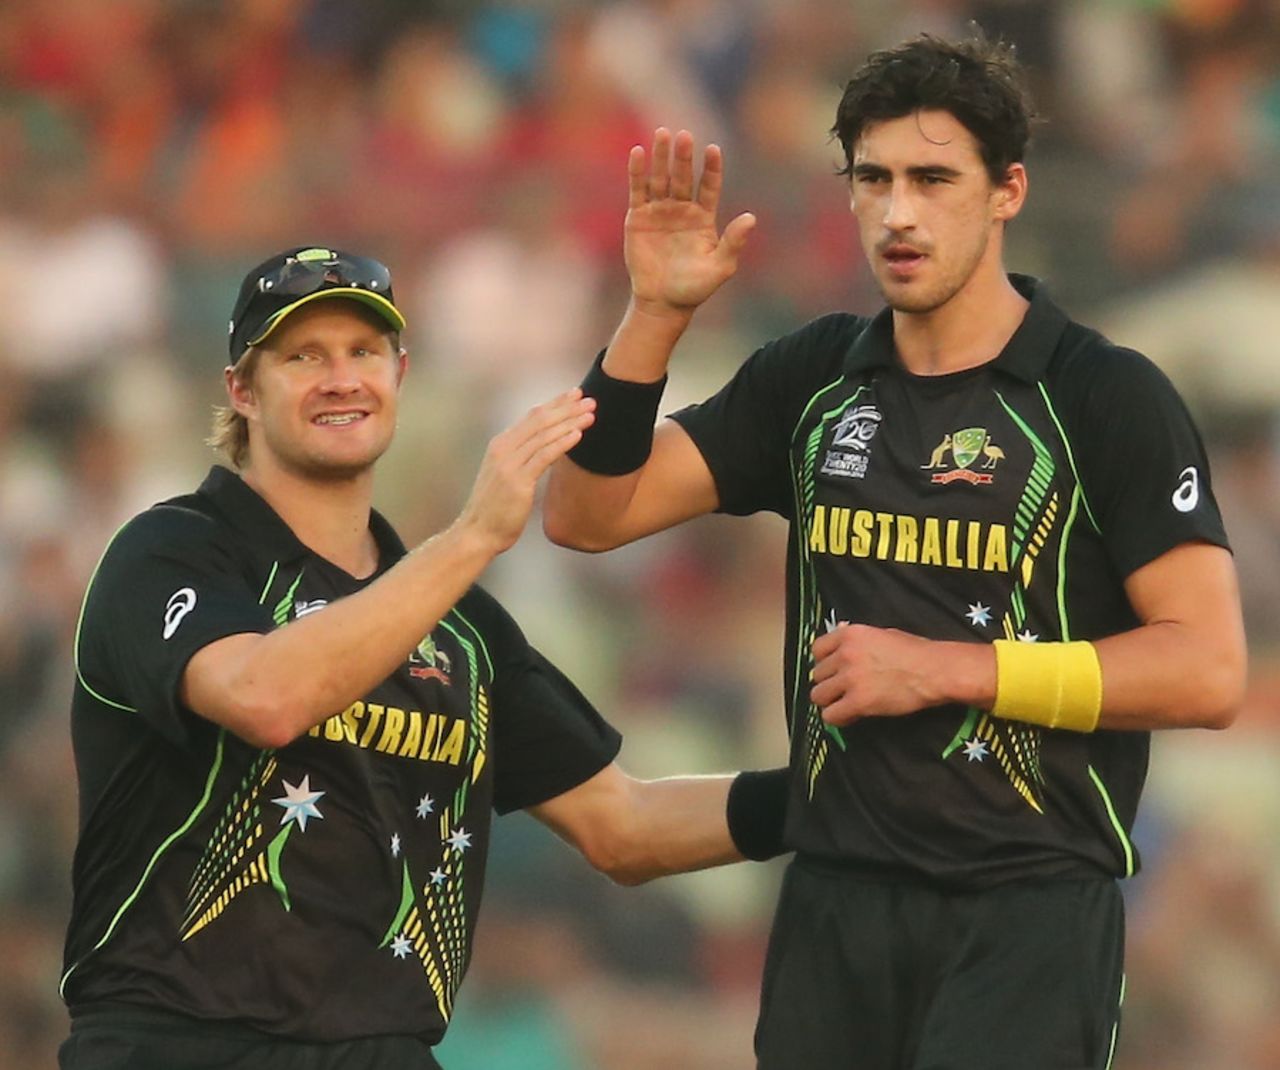 Mitchell Starc gets a pat on his back after he dismissed Dwayne Smith, Australia v West Indies, World T20, Group 2, Mirpur, March 28, 2014